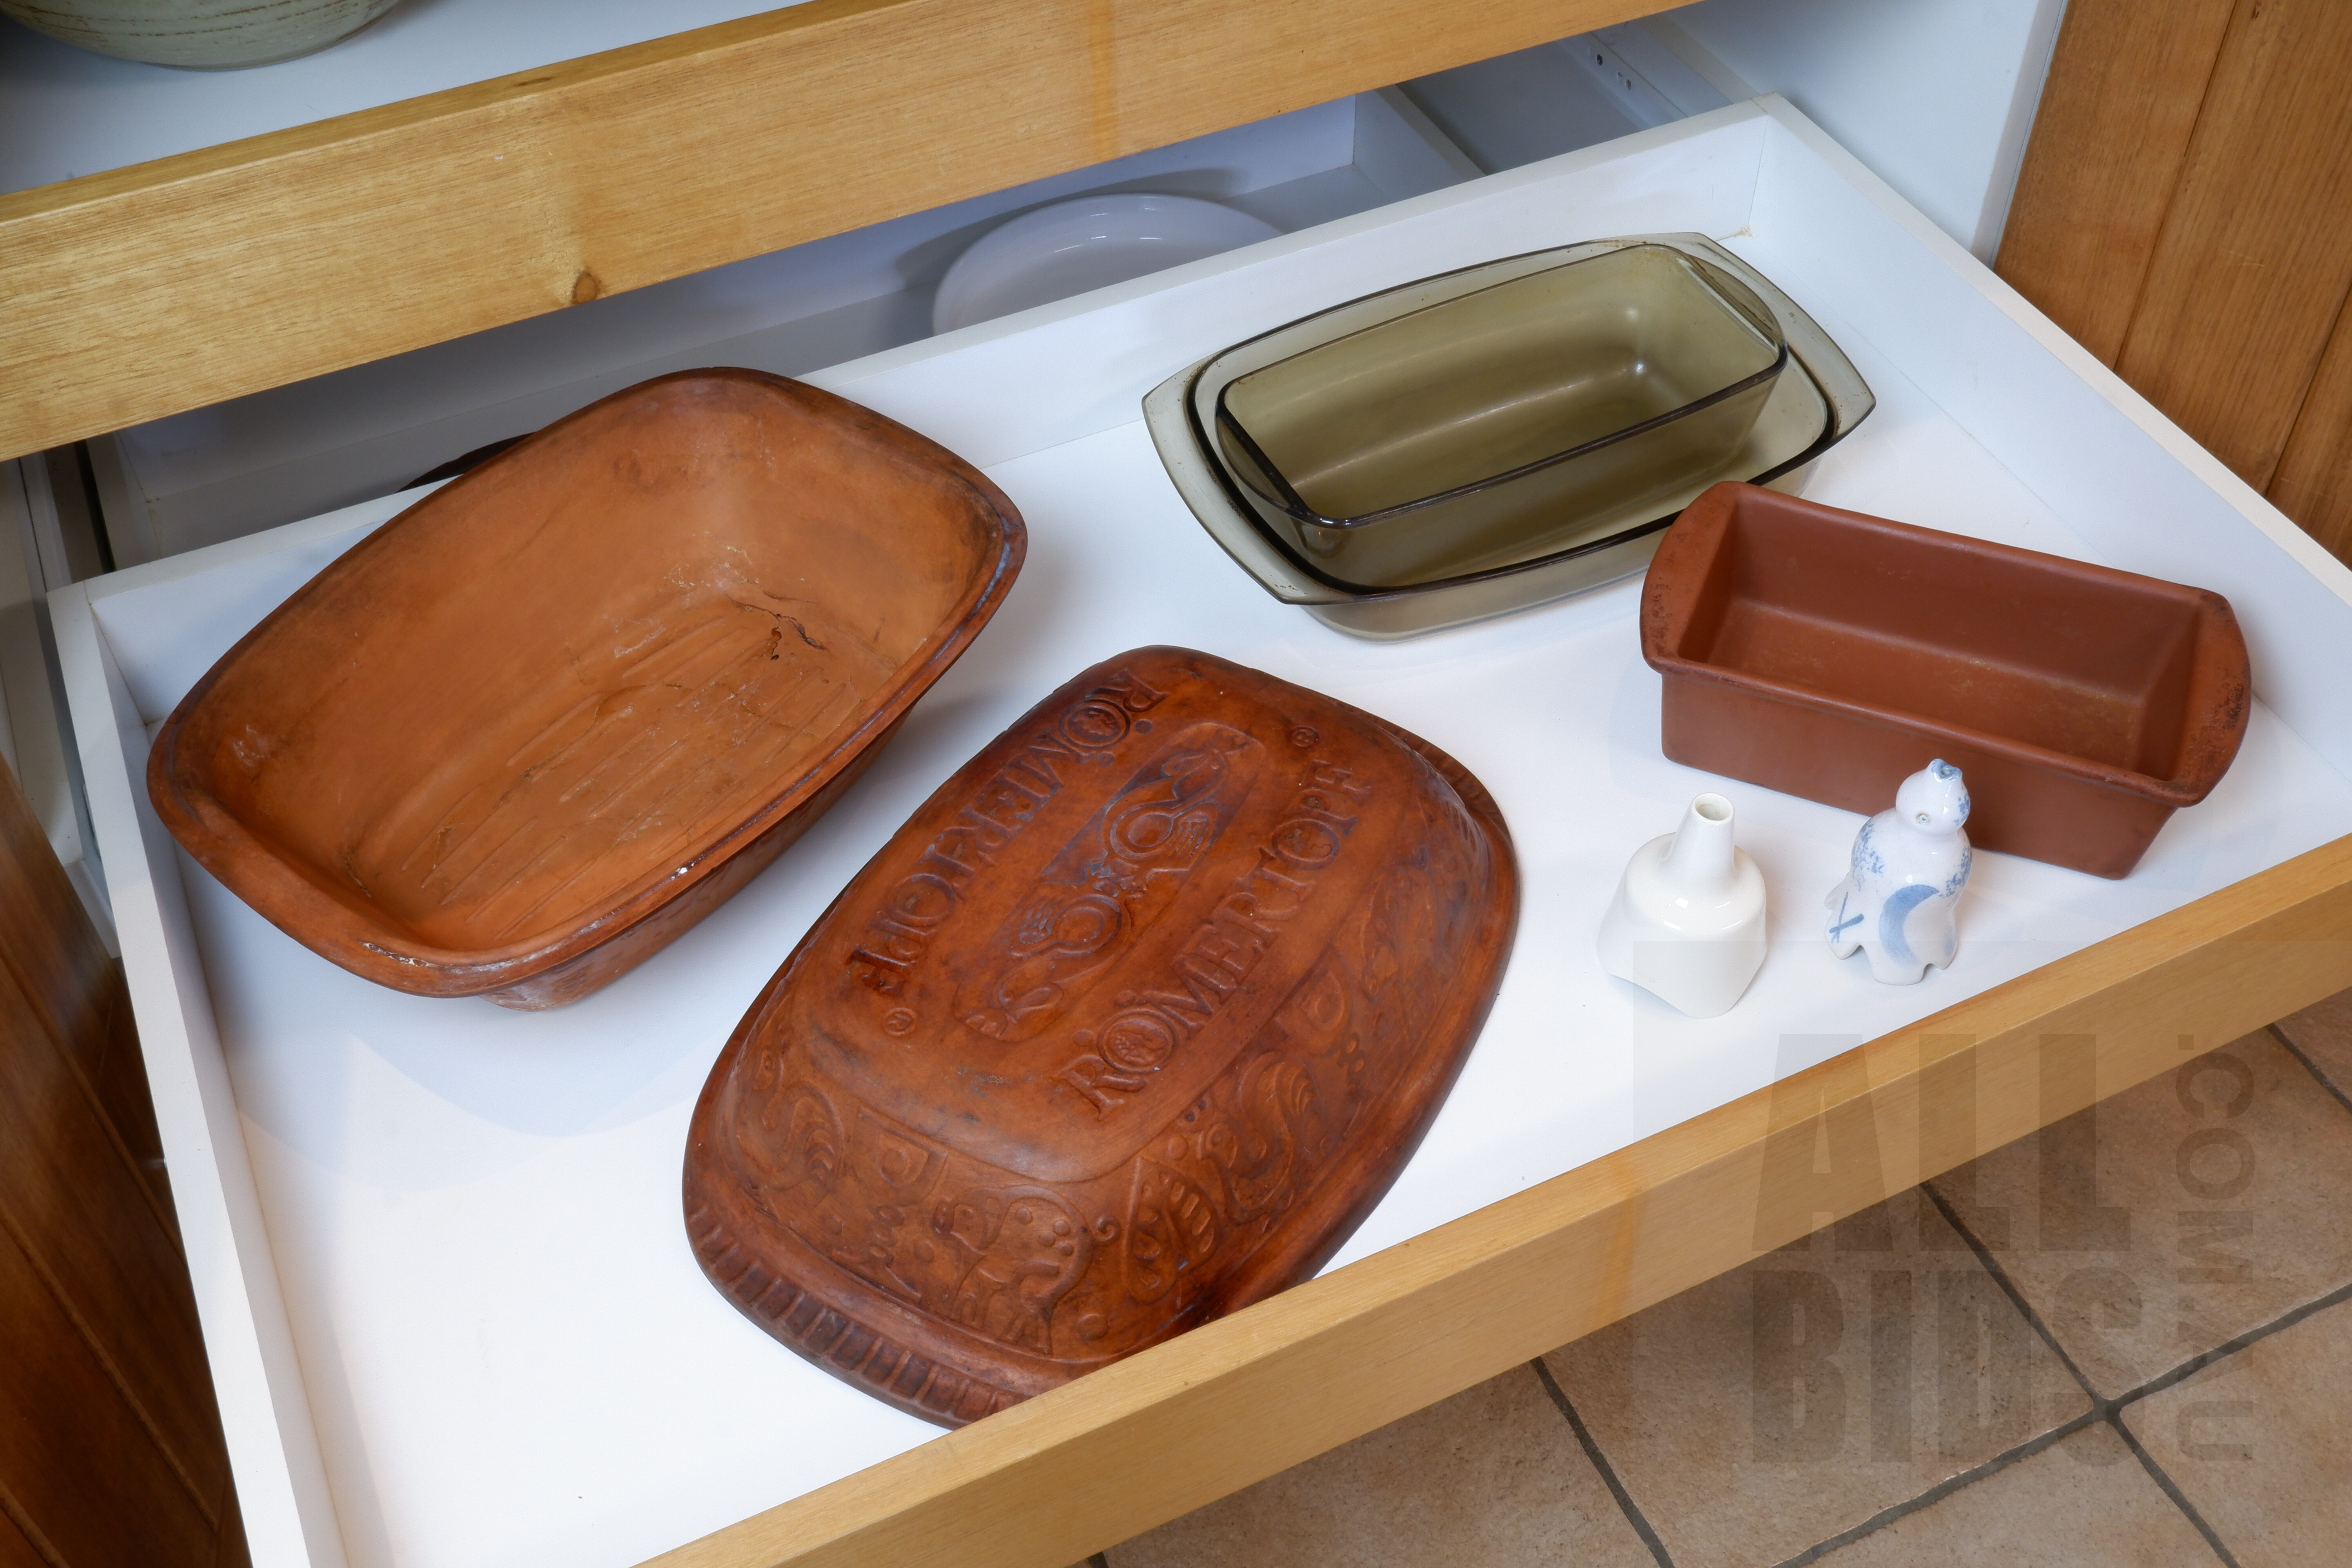 'Two French Arcopal Glass Oven Dishes, USA Copco Stoneware Baking Dish, West German Stoneware Baking Dish and More'